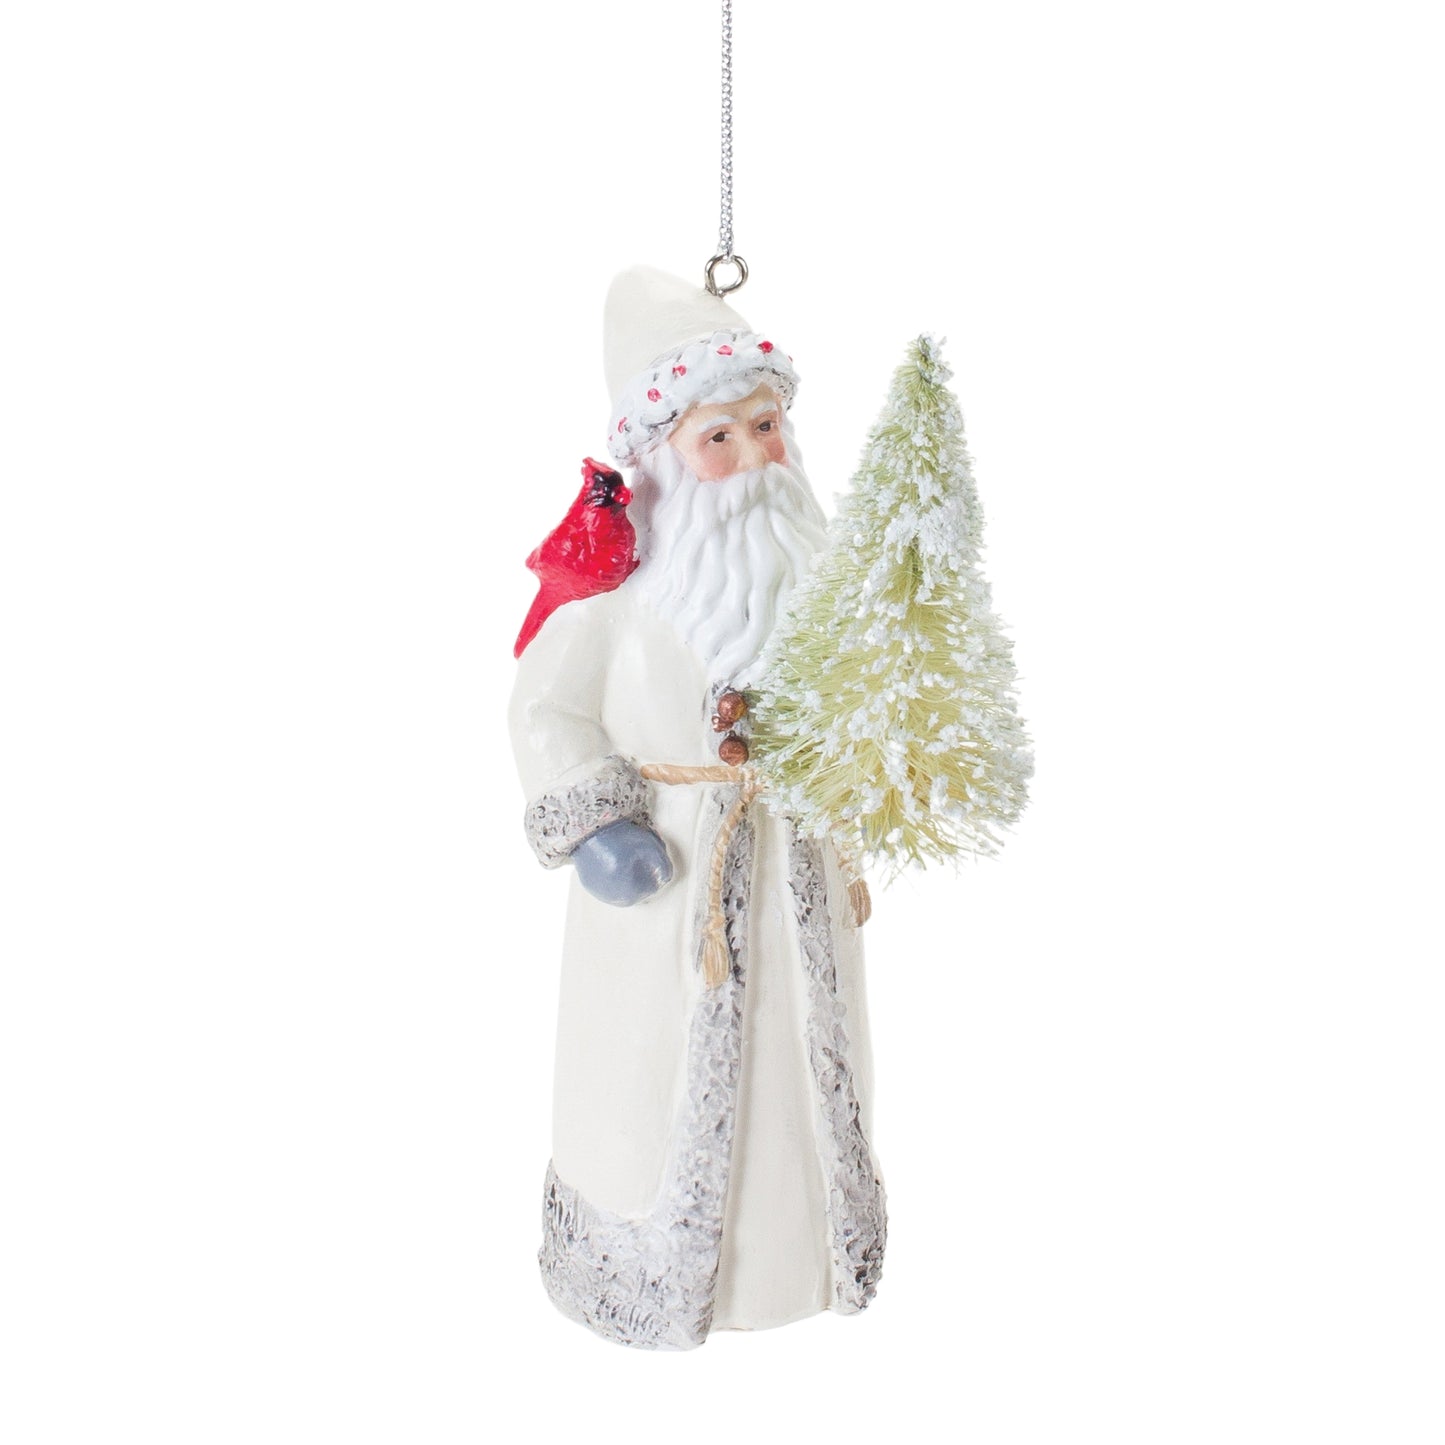 santa wearing a white robe with a cardinal on its shoulder and holding a tree displayed against a white background